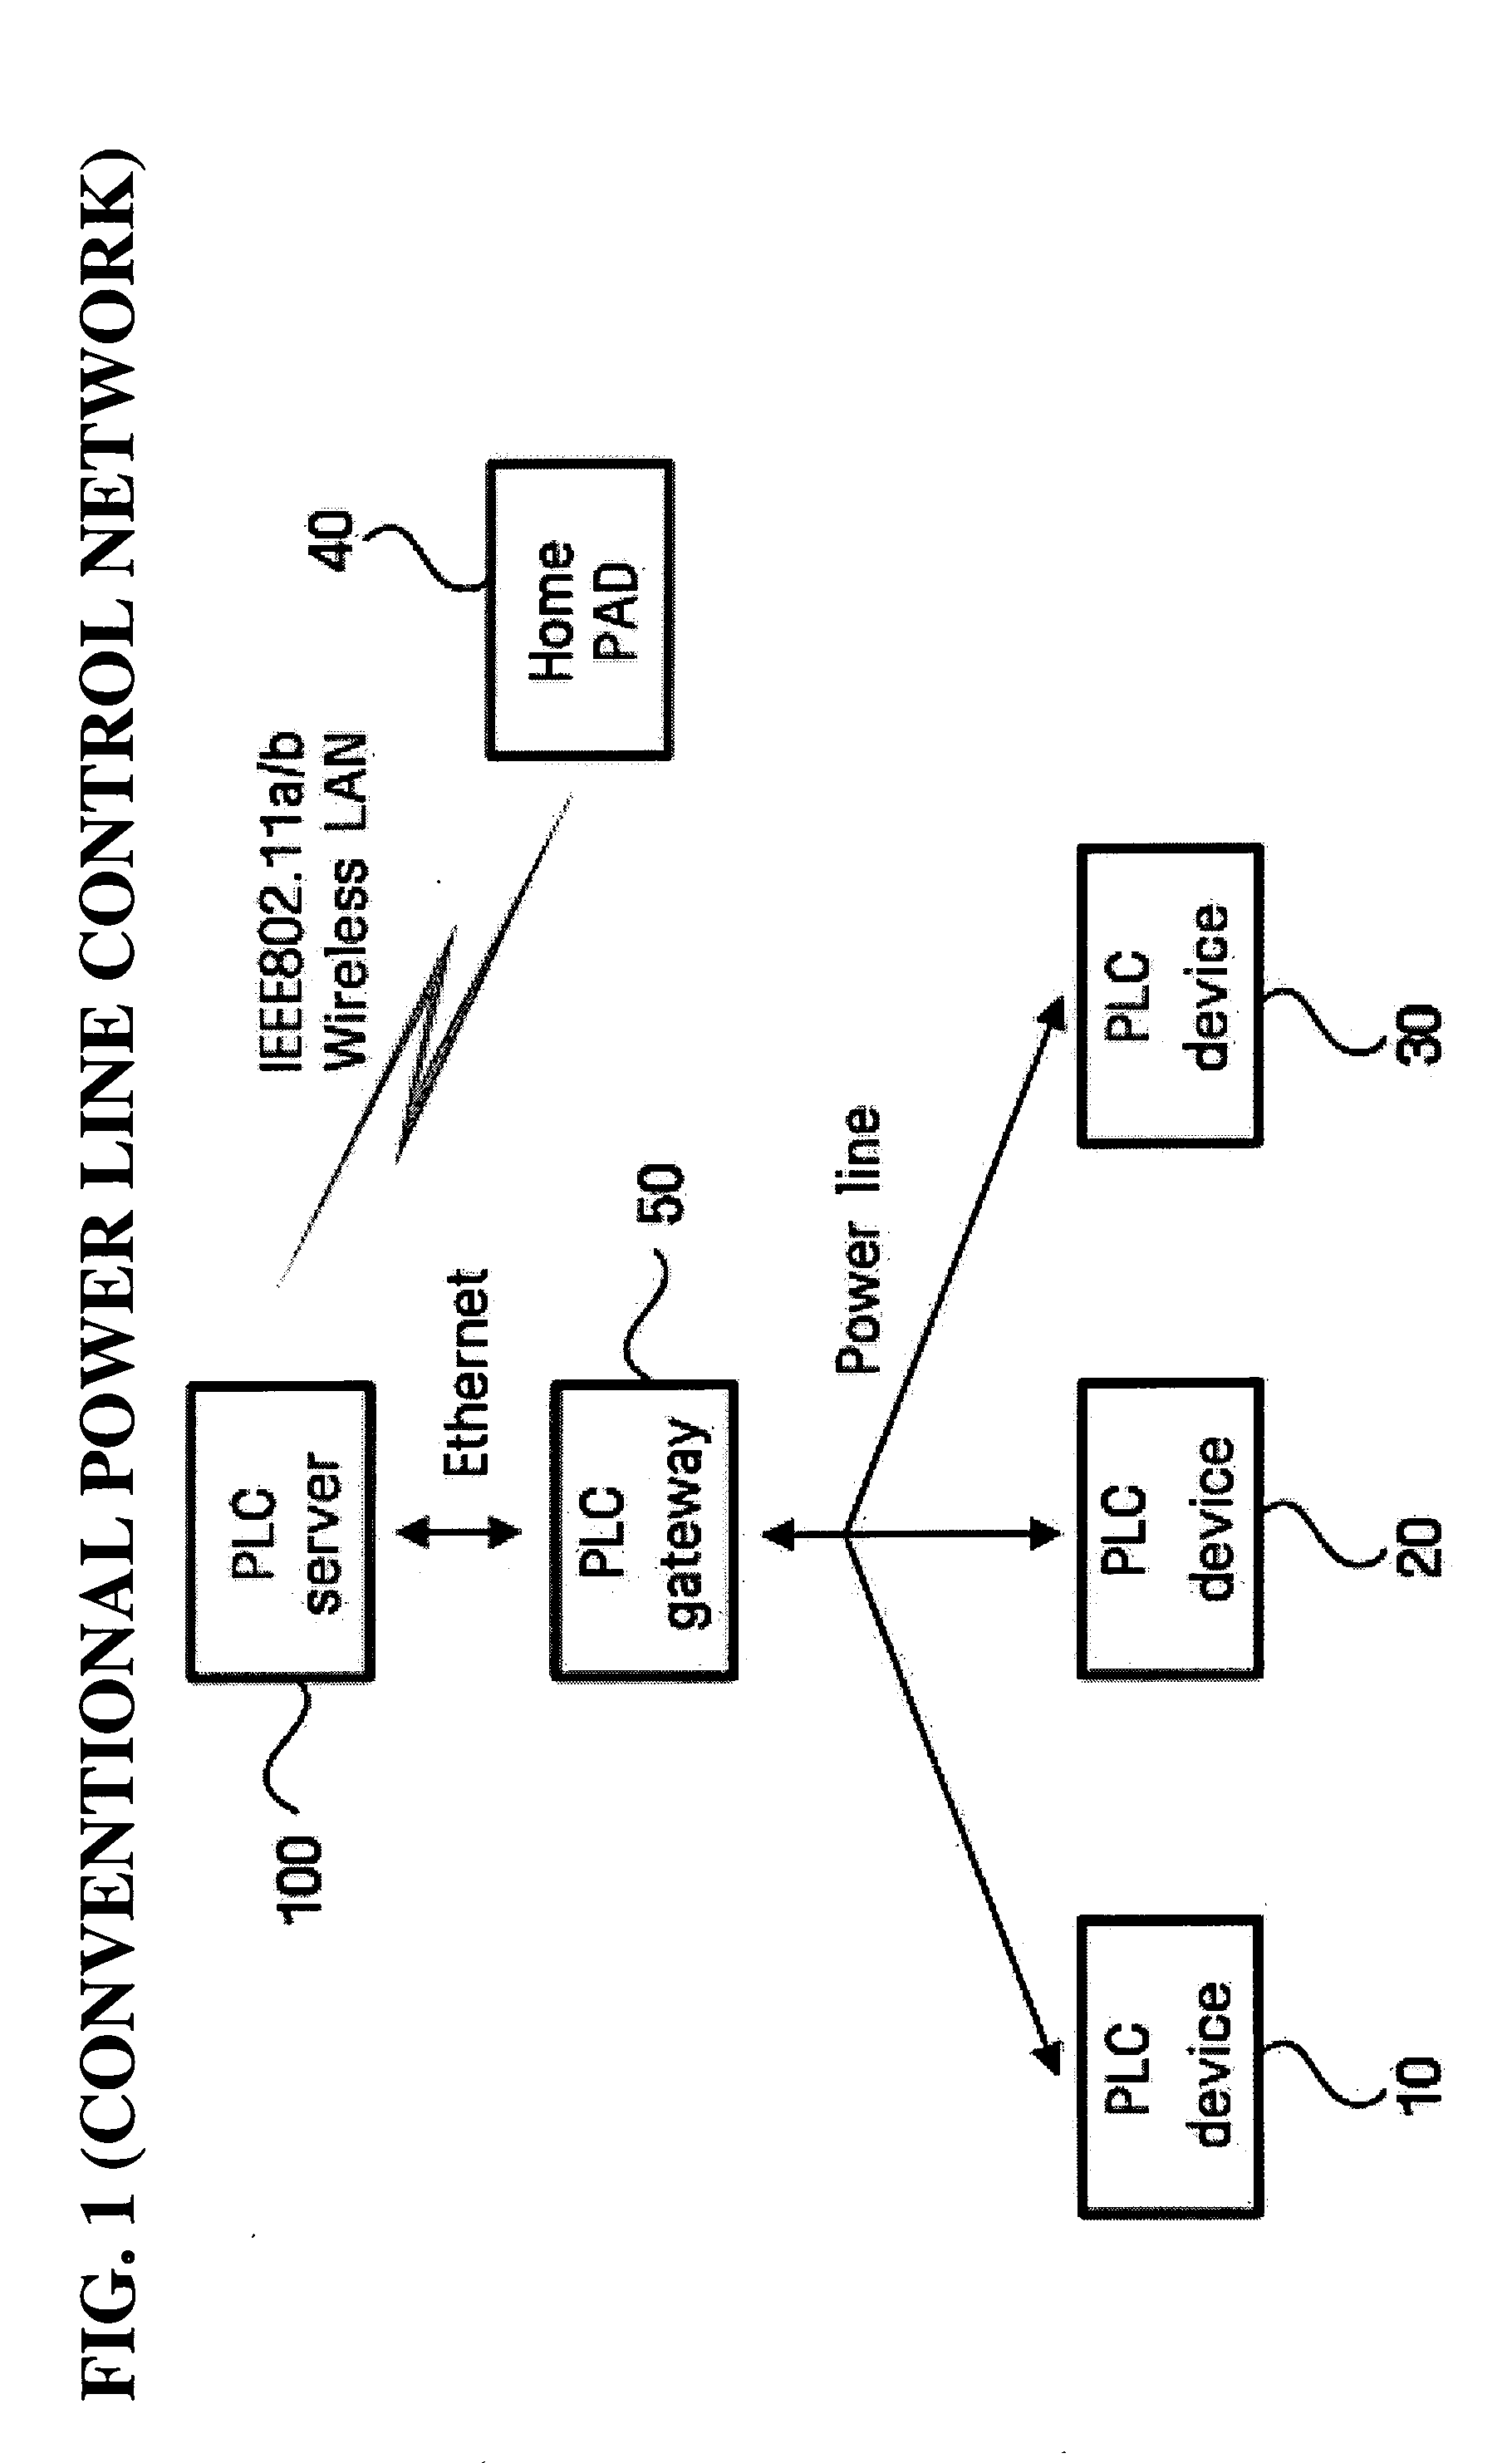 Bridging apparatus and method for enabling a UPnP device to control a PLC device